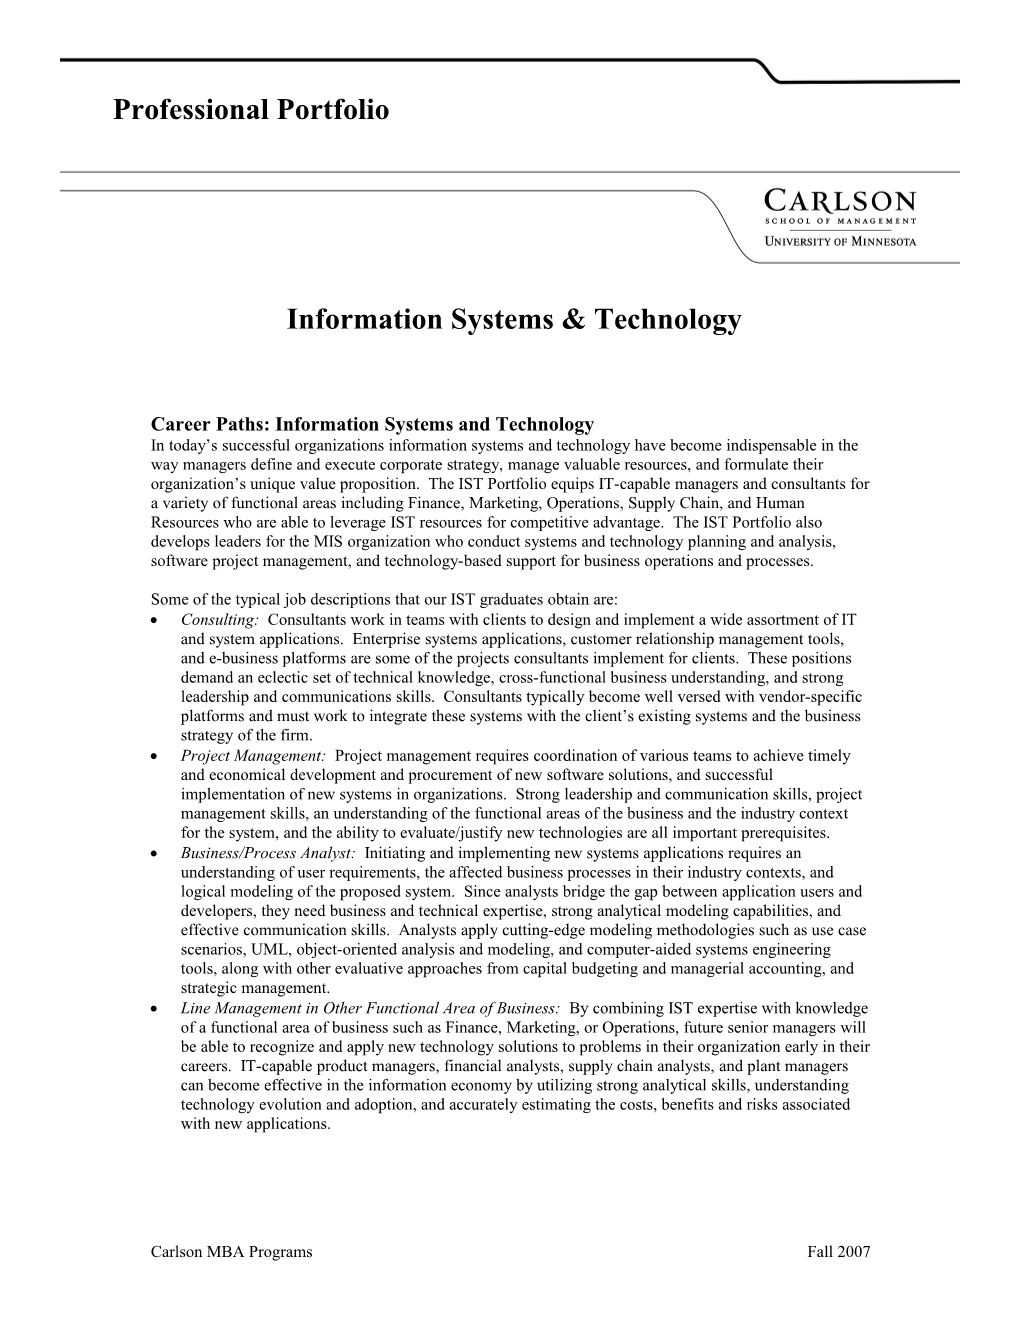 Information Systems & Technology (Word 1 MB)